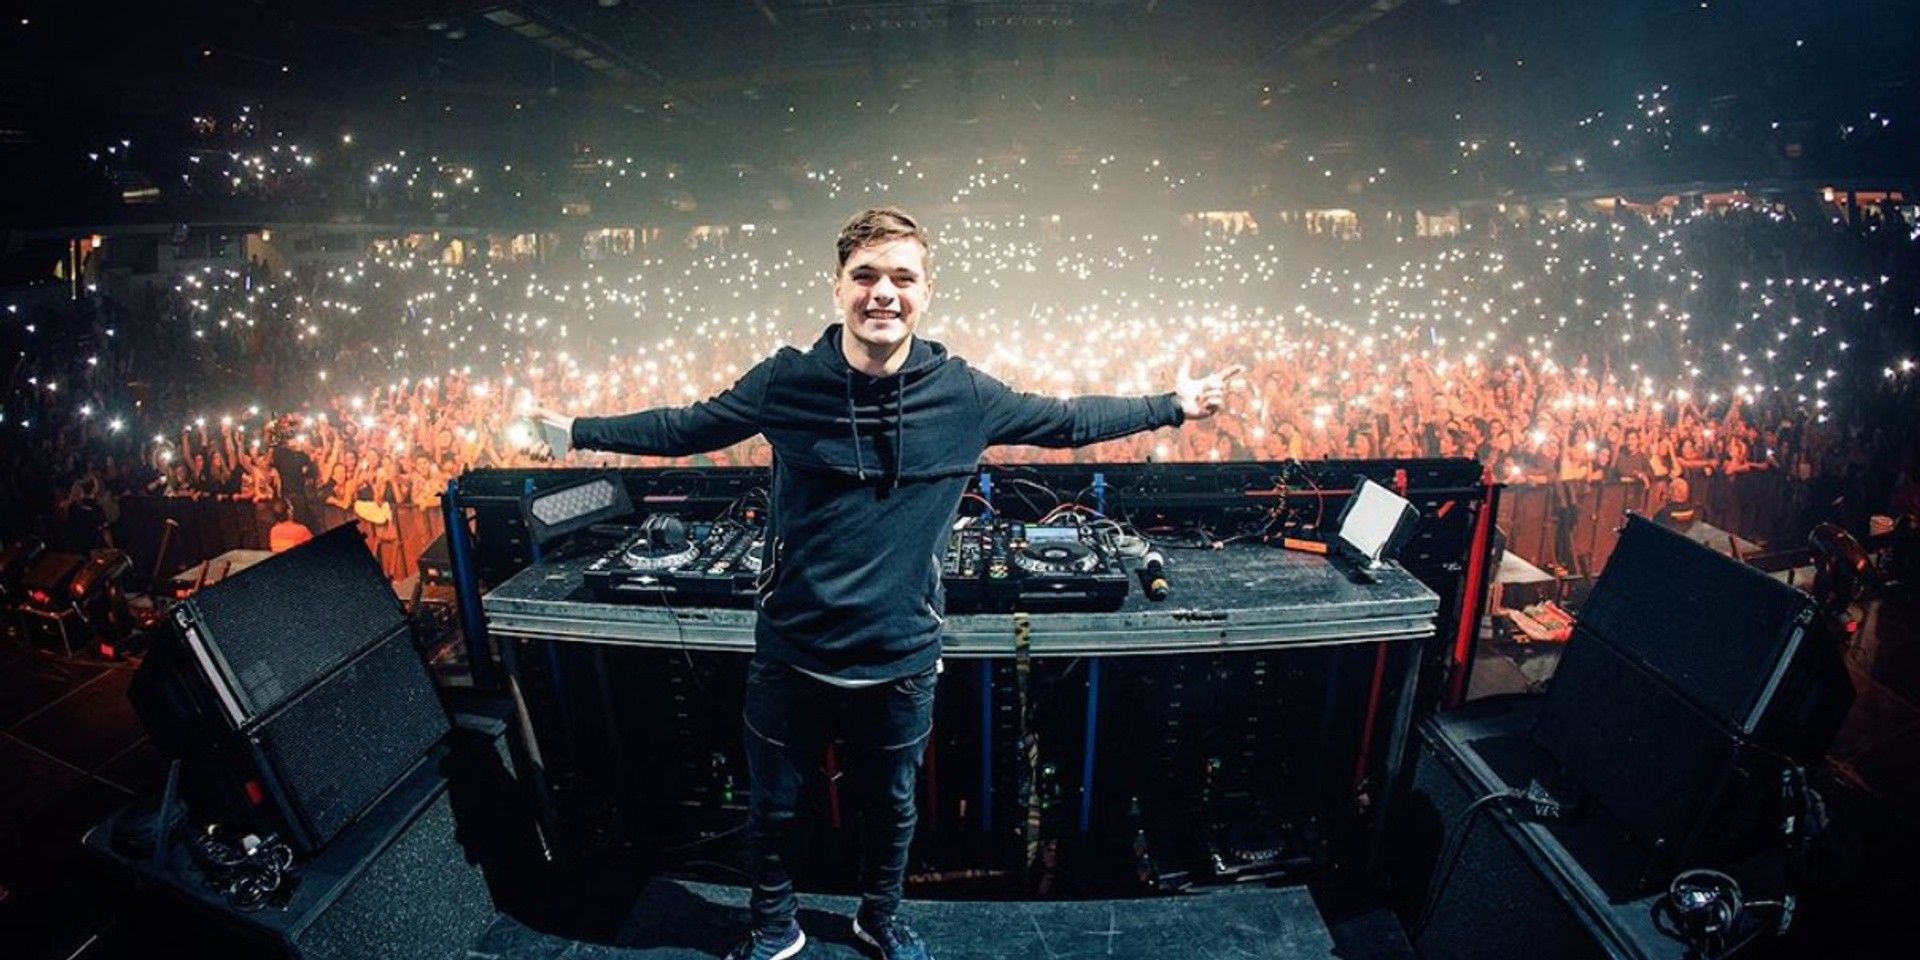 Don't Let Daddy Know returns to Thailand in 2018 with Martin Garrix